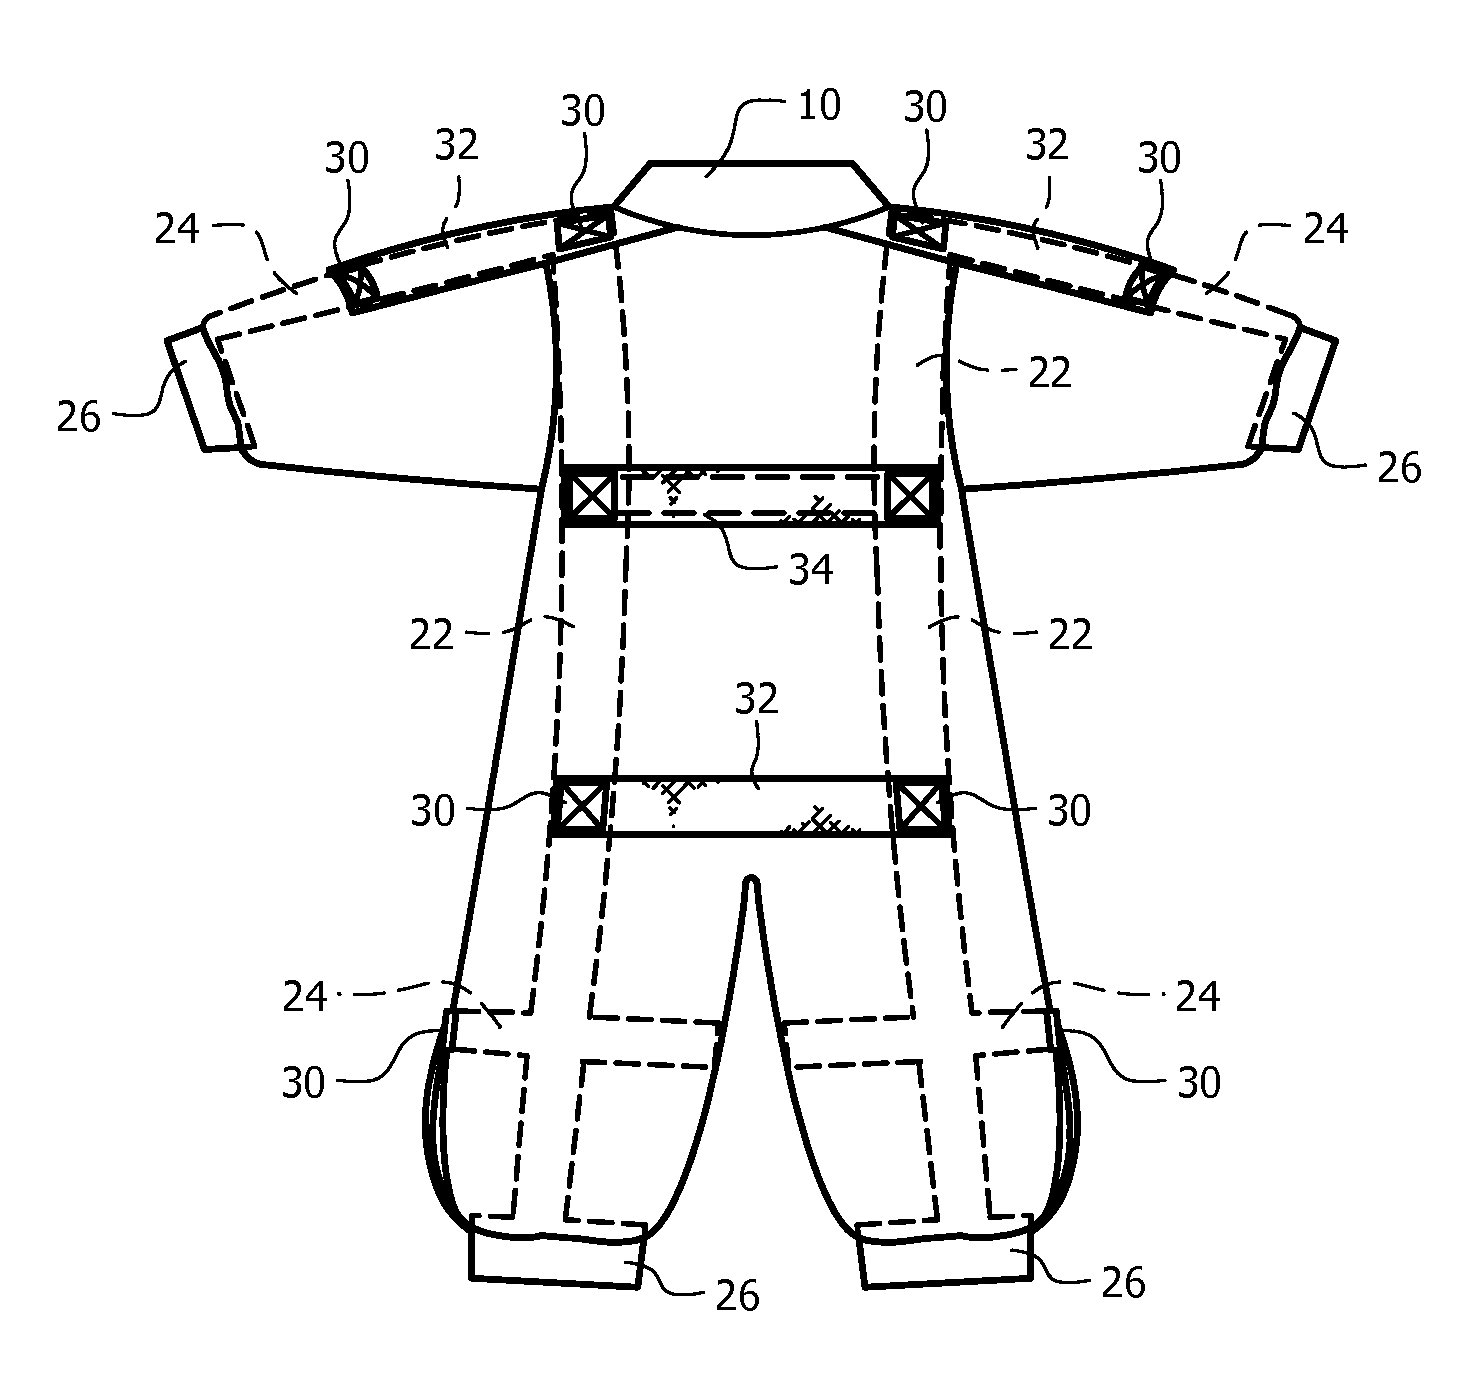 Children's clothing with hidden harness and exterior handholds